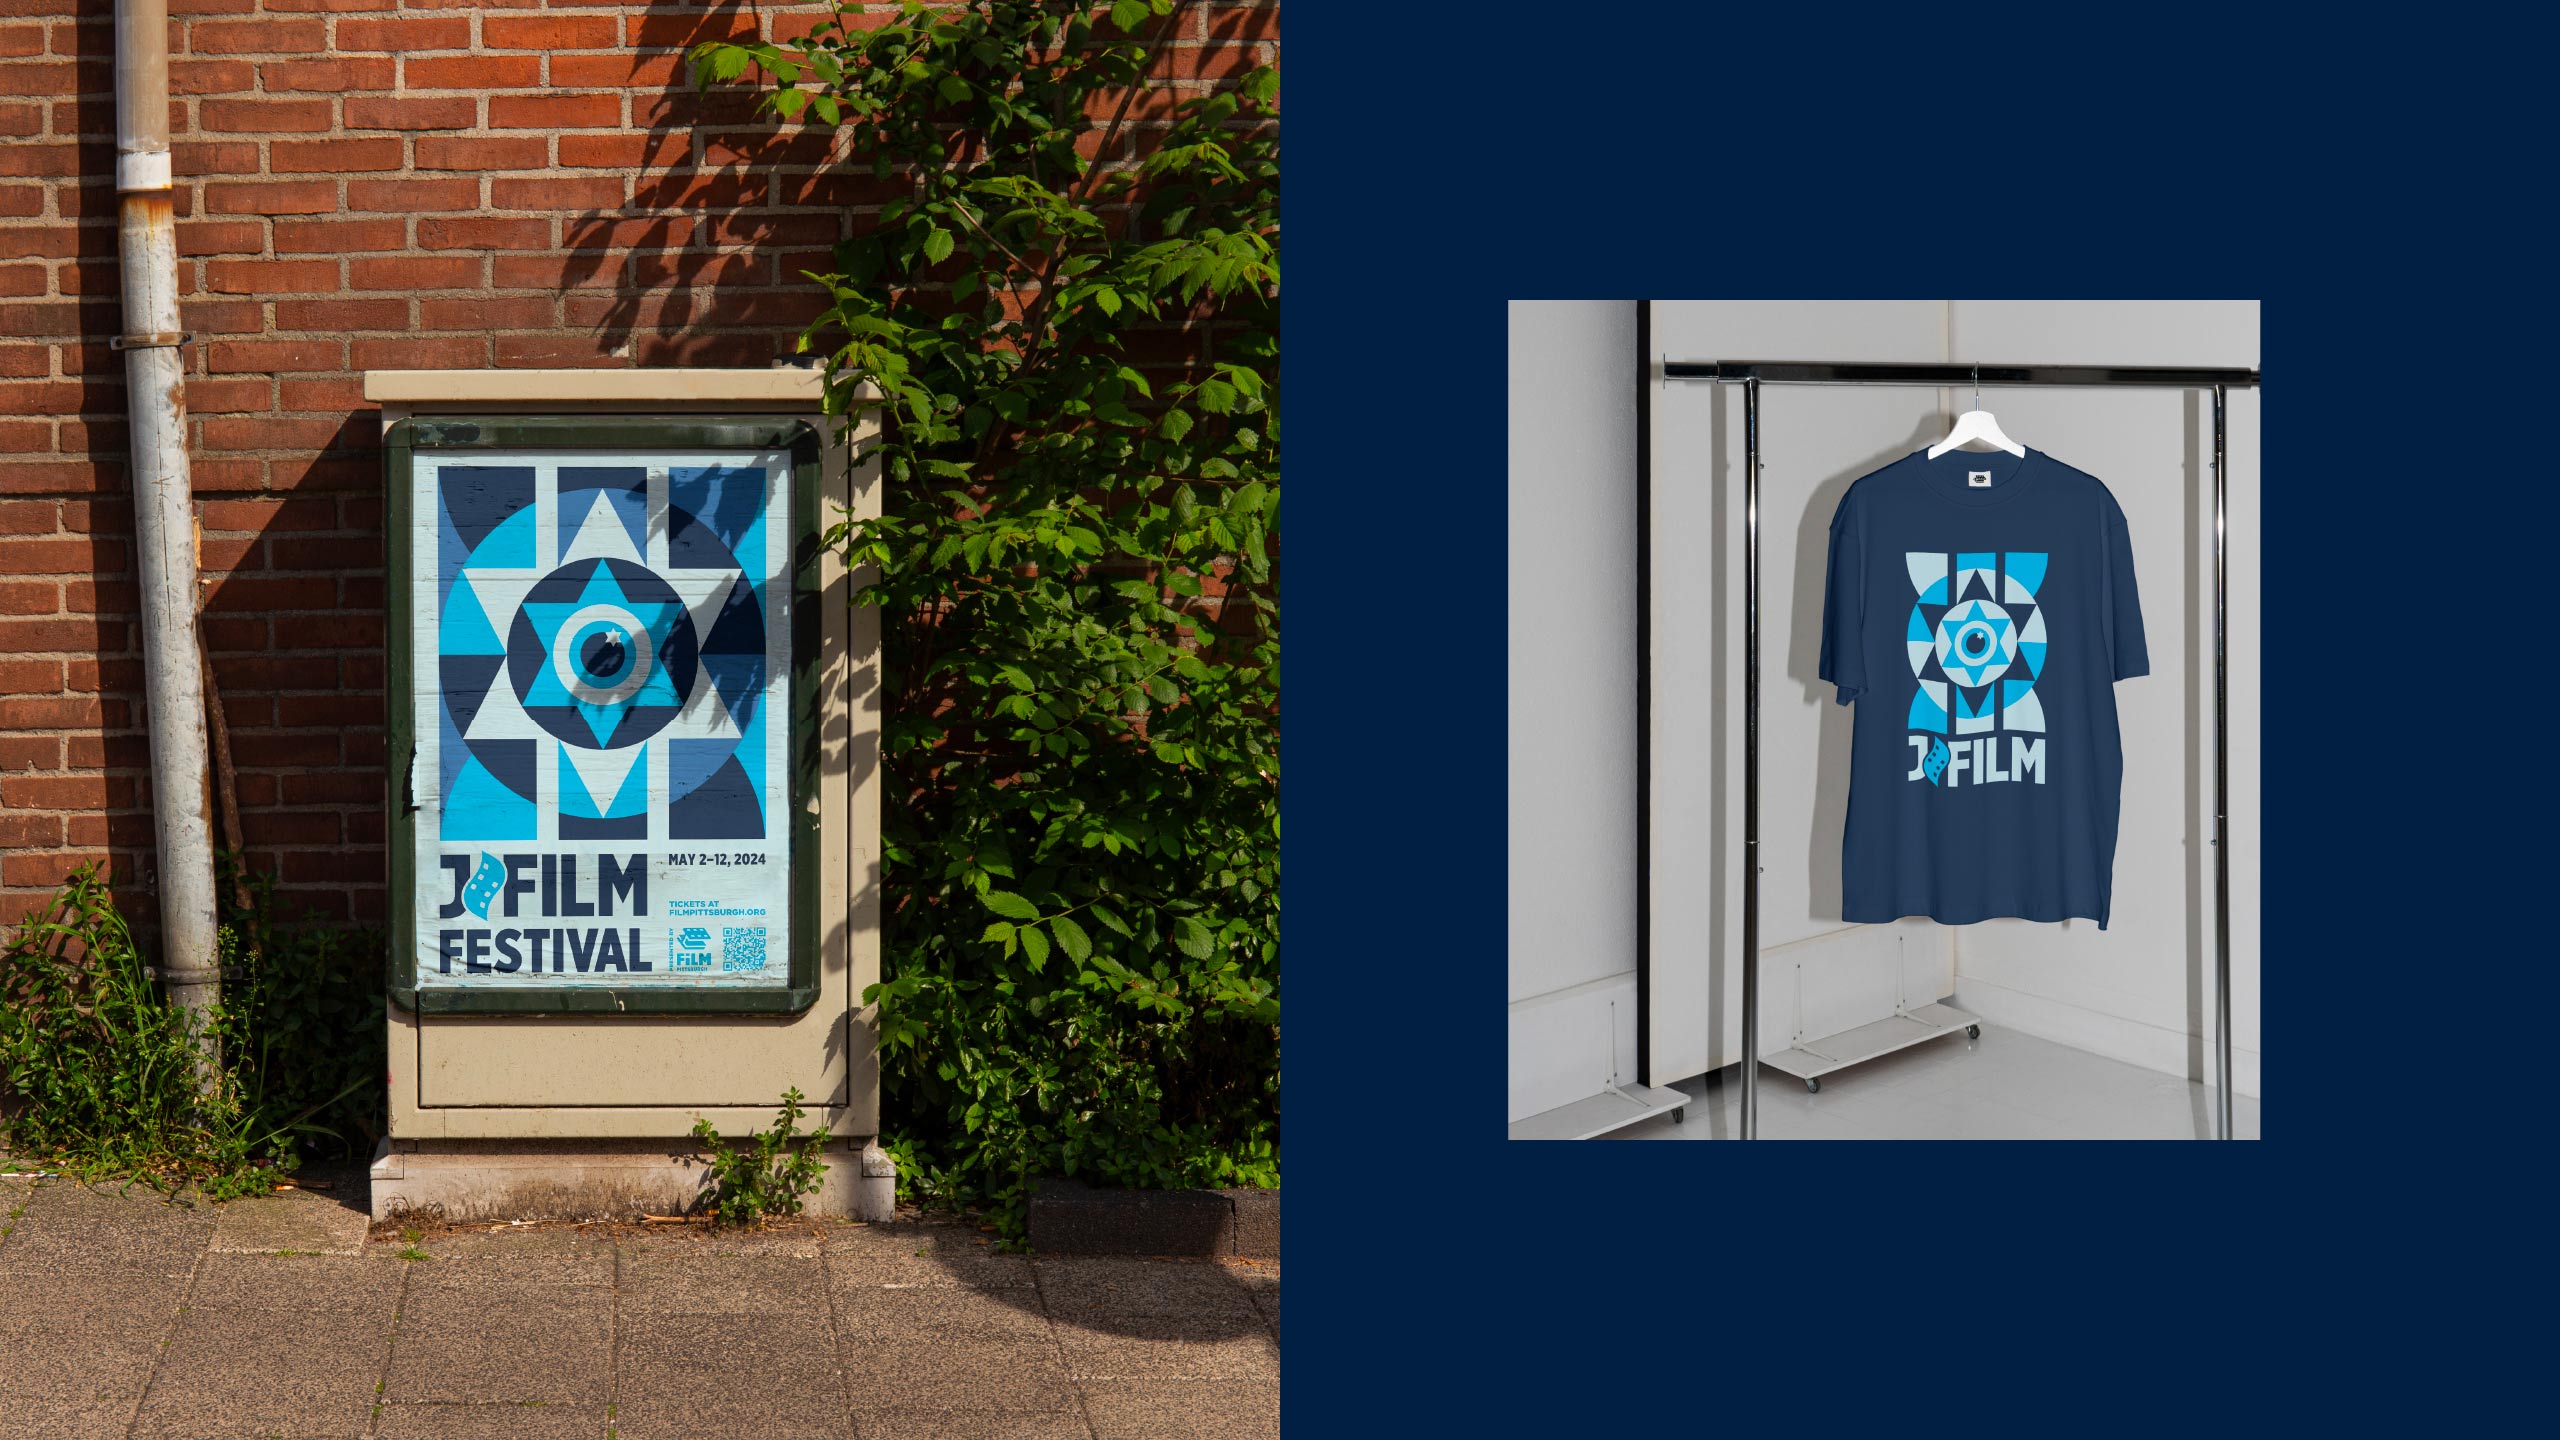 JFilm Festival outdoor advertisement and official t-shirt.